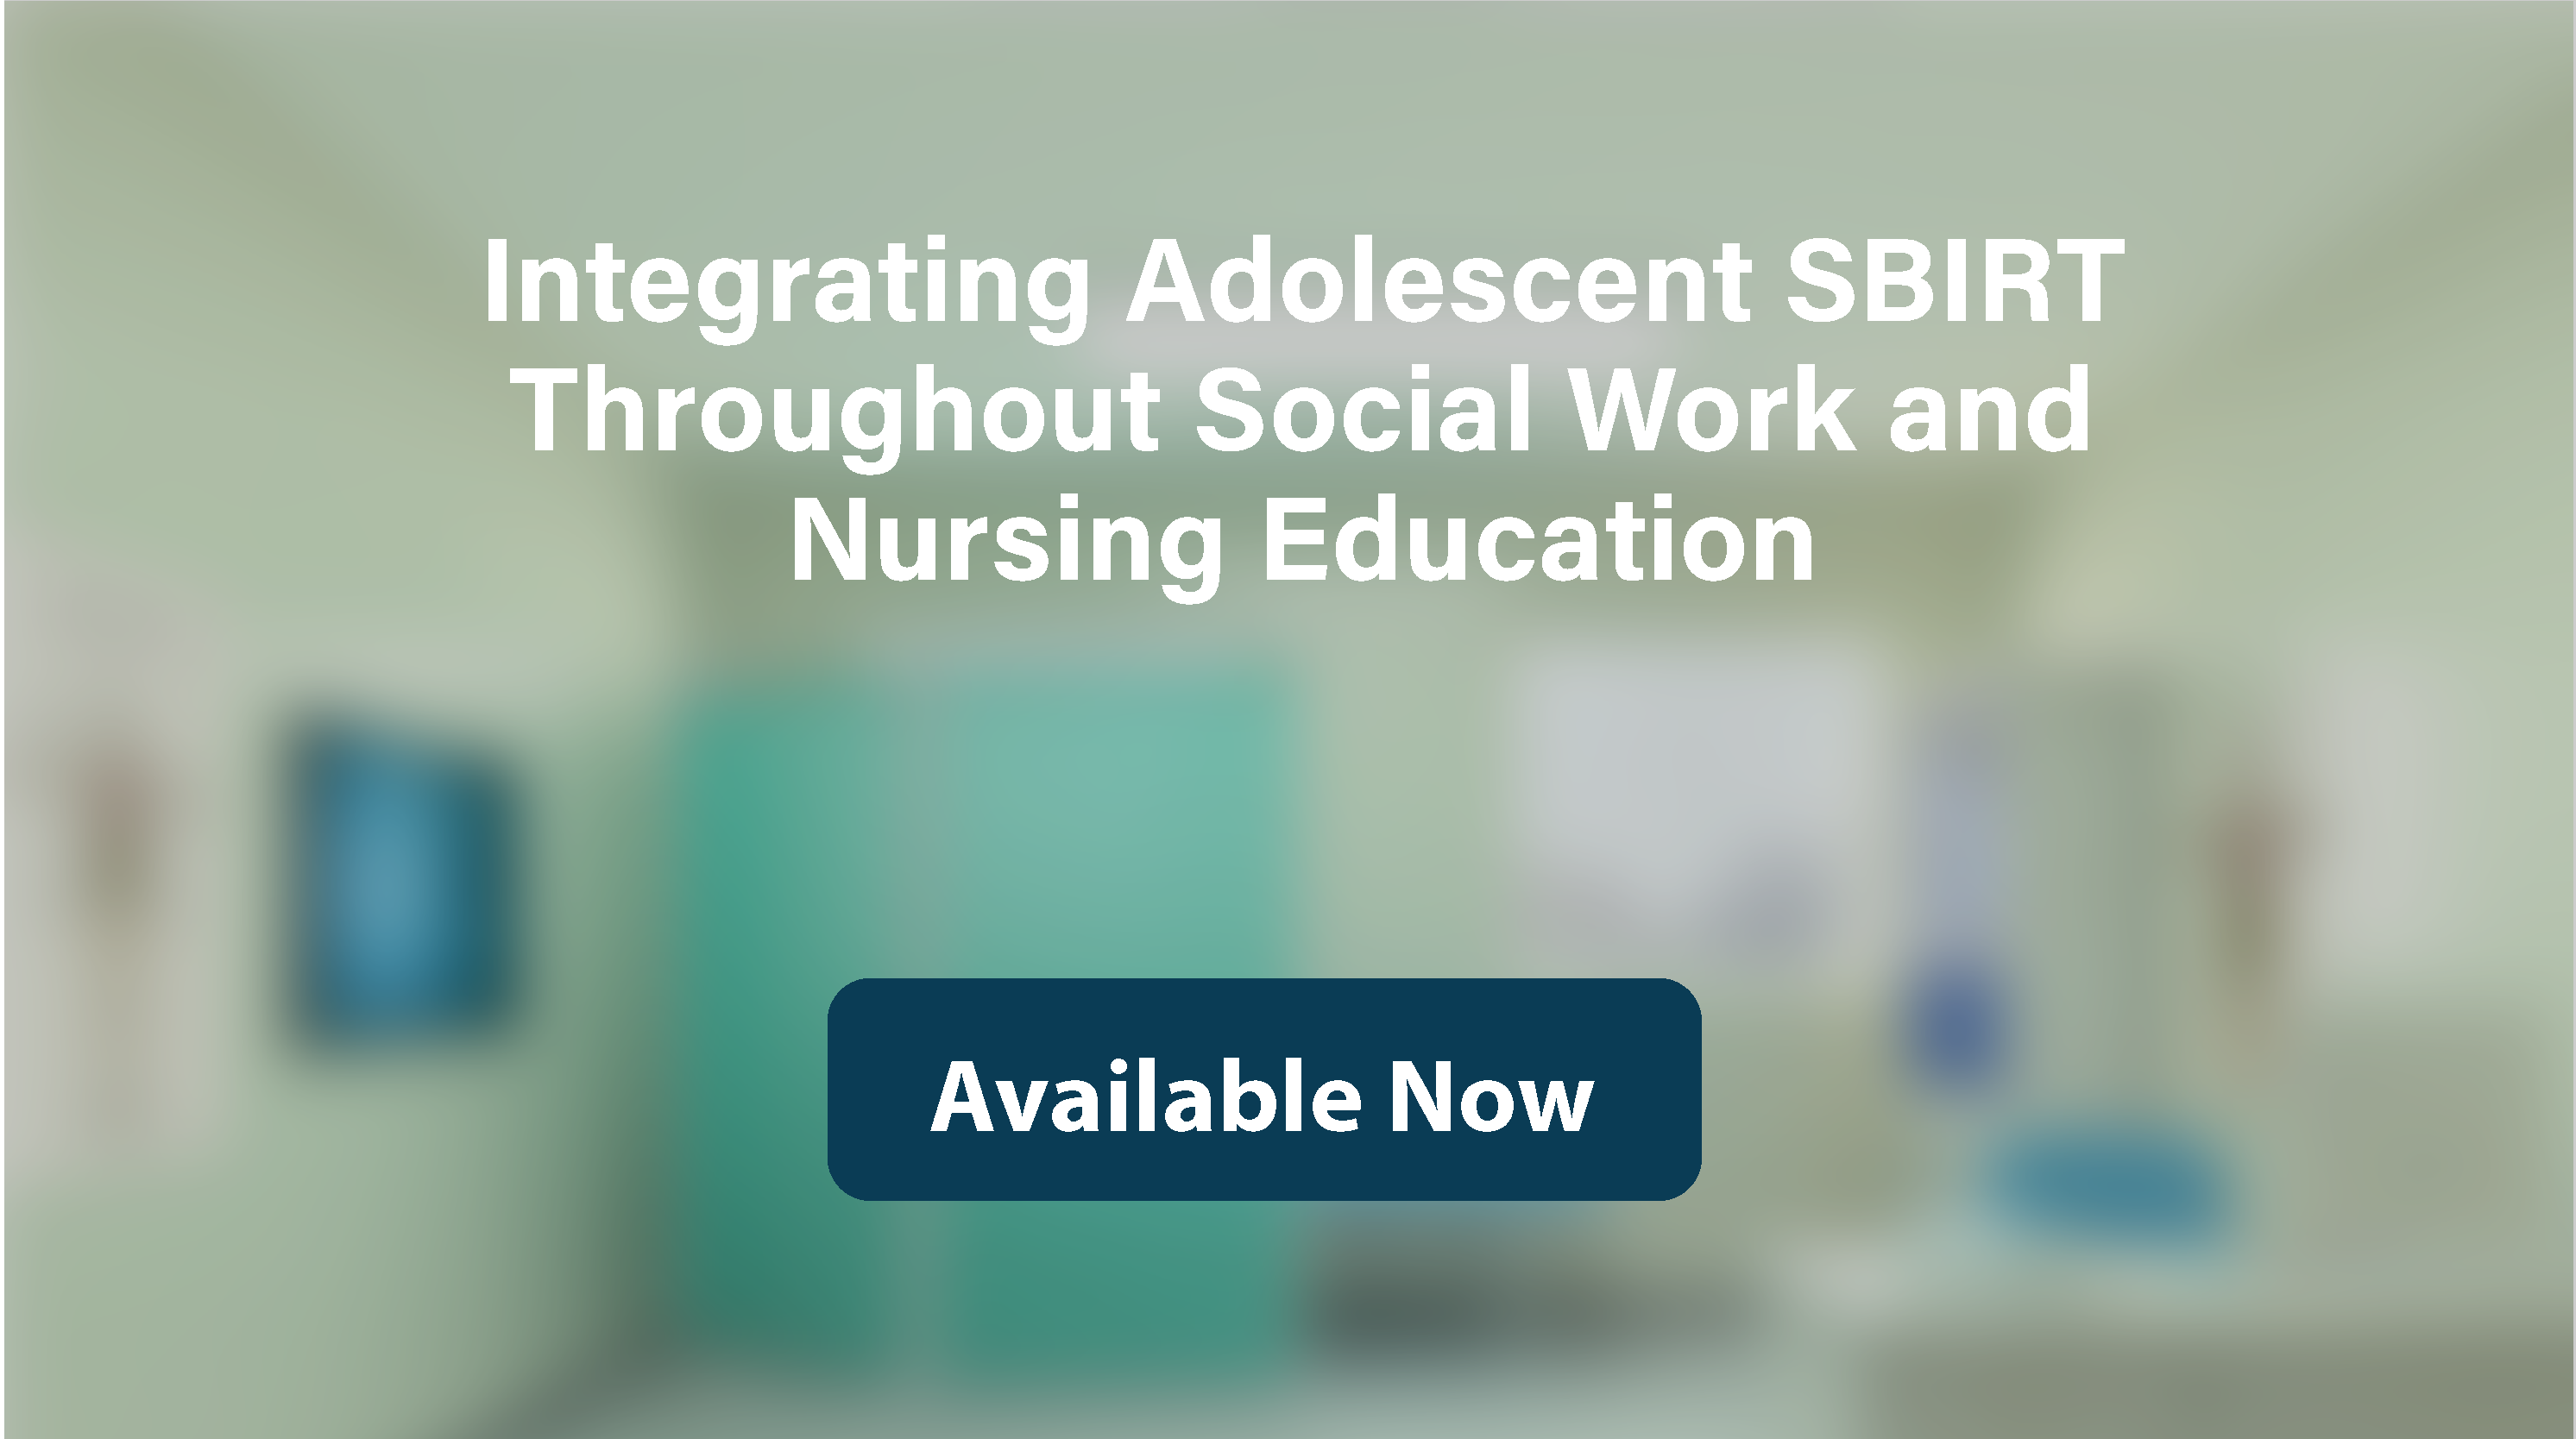 Integrating Adolescent SBIRT Throughout Social Work and Nursing Education